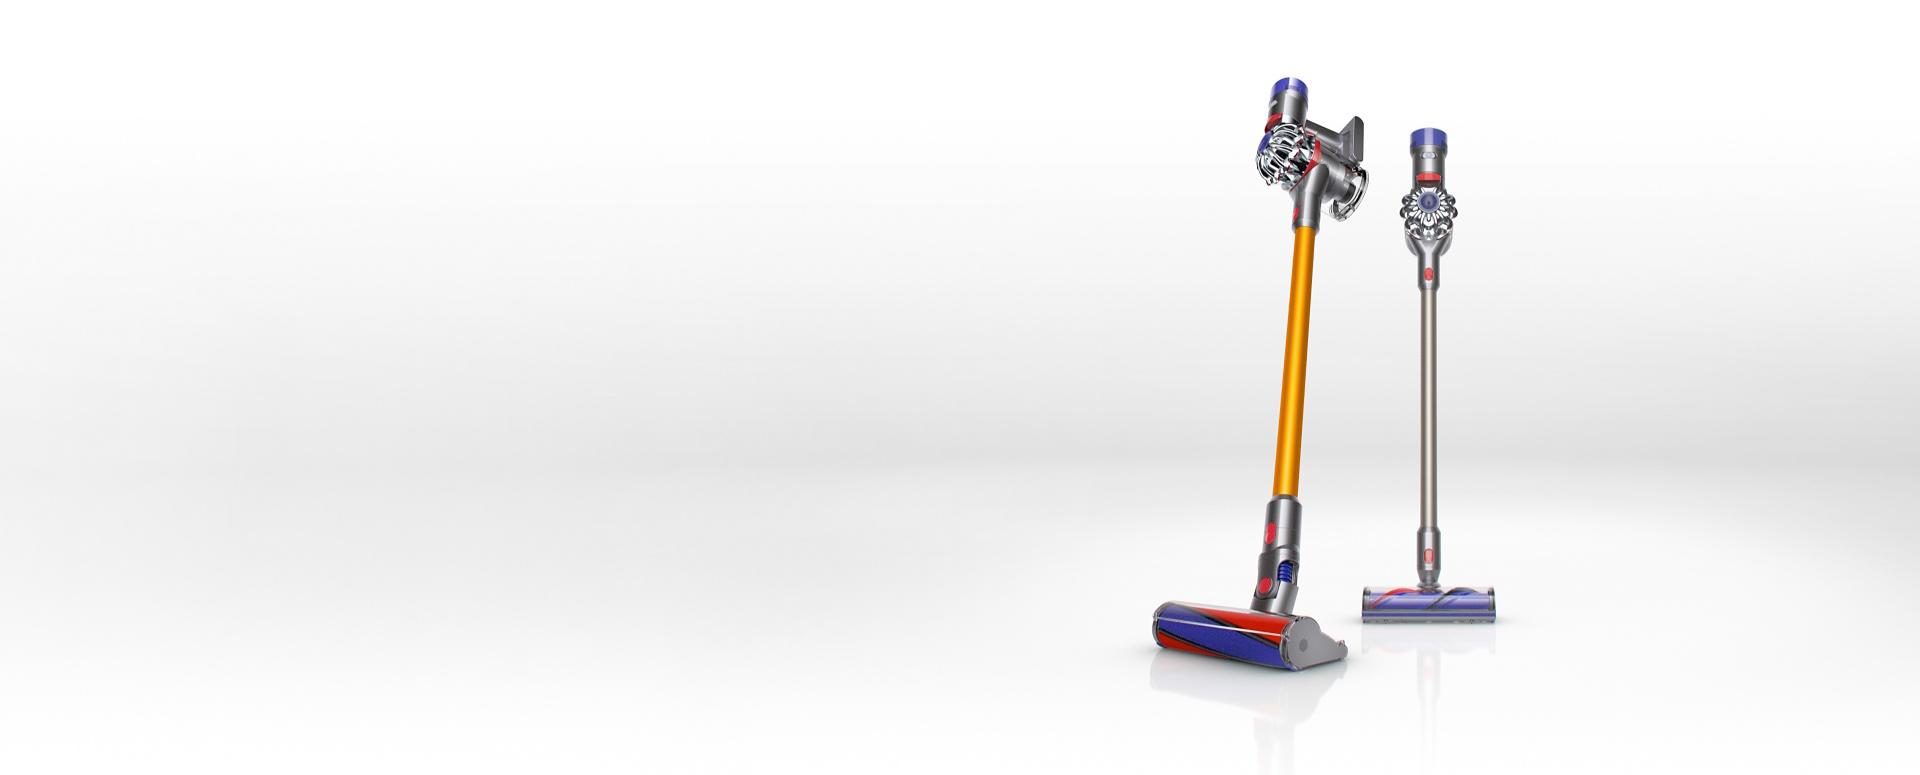 Two Dyson V8 vacuum cleaners